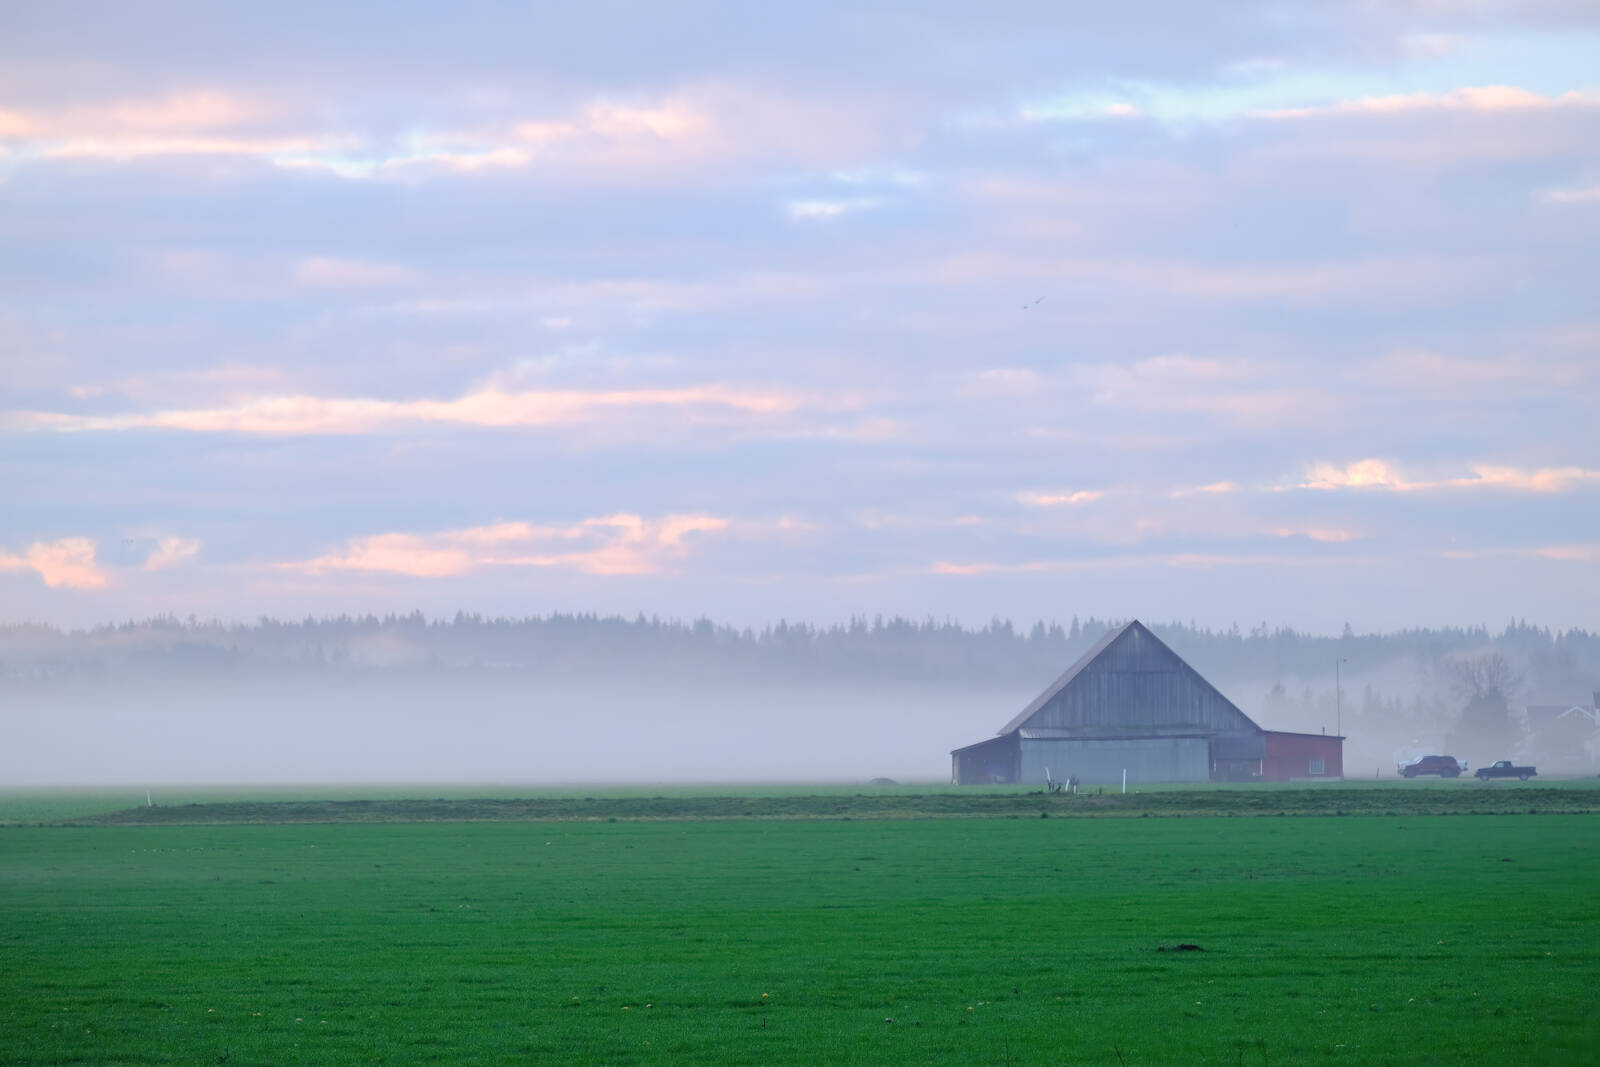 Image of Barn in Conway, WA by Arnie Lund